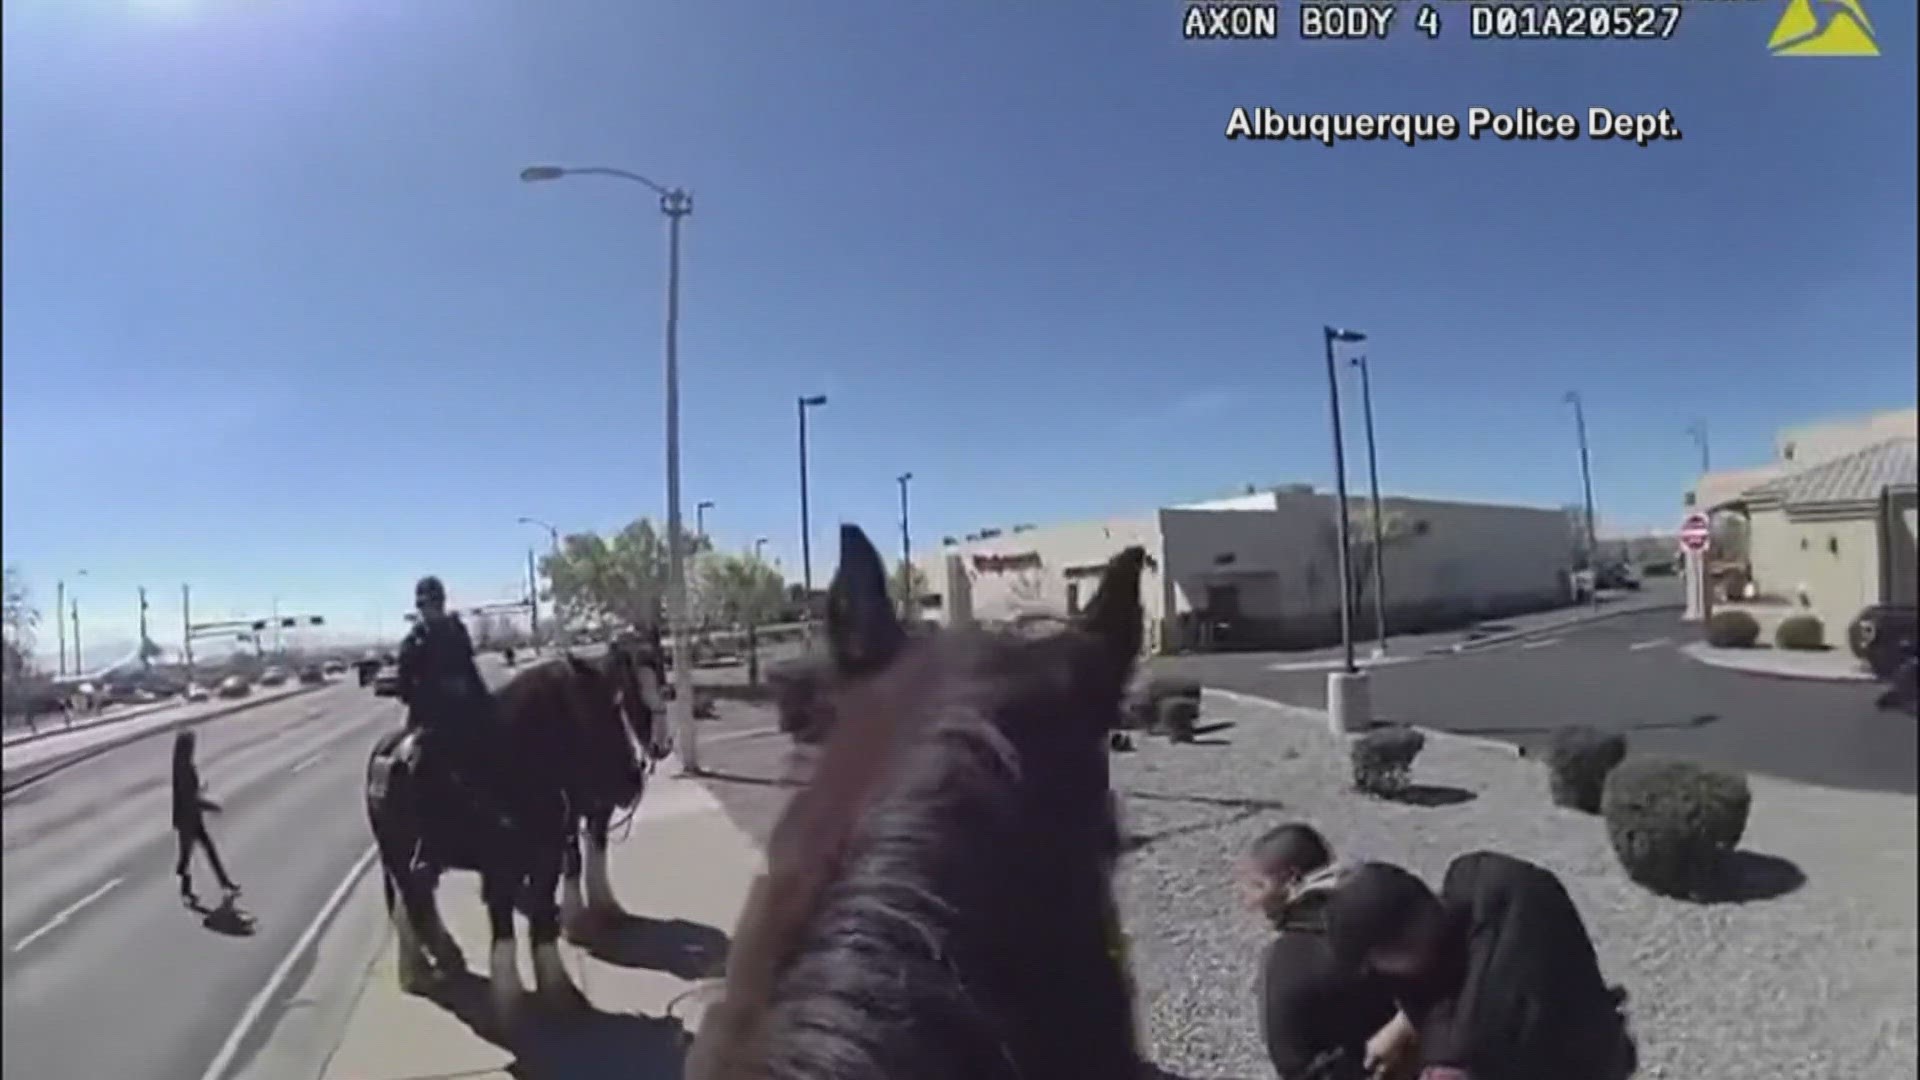 This is something you don't see everyday: Police in Albuquerque, N.M. chased down a robbery suspect on horseback.